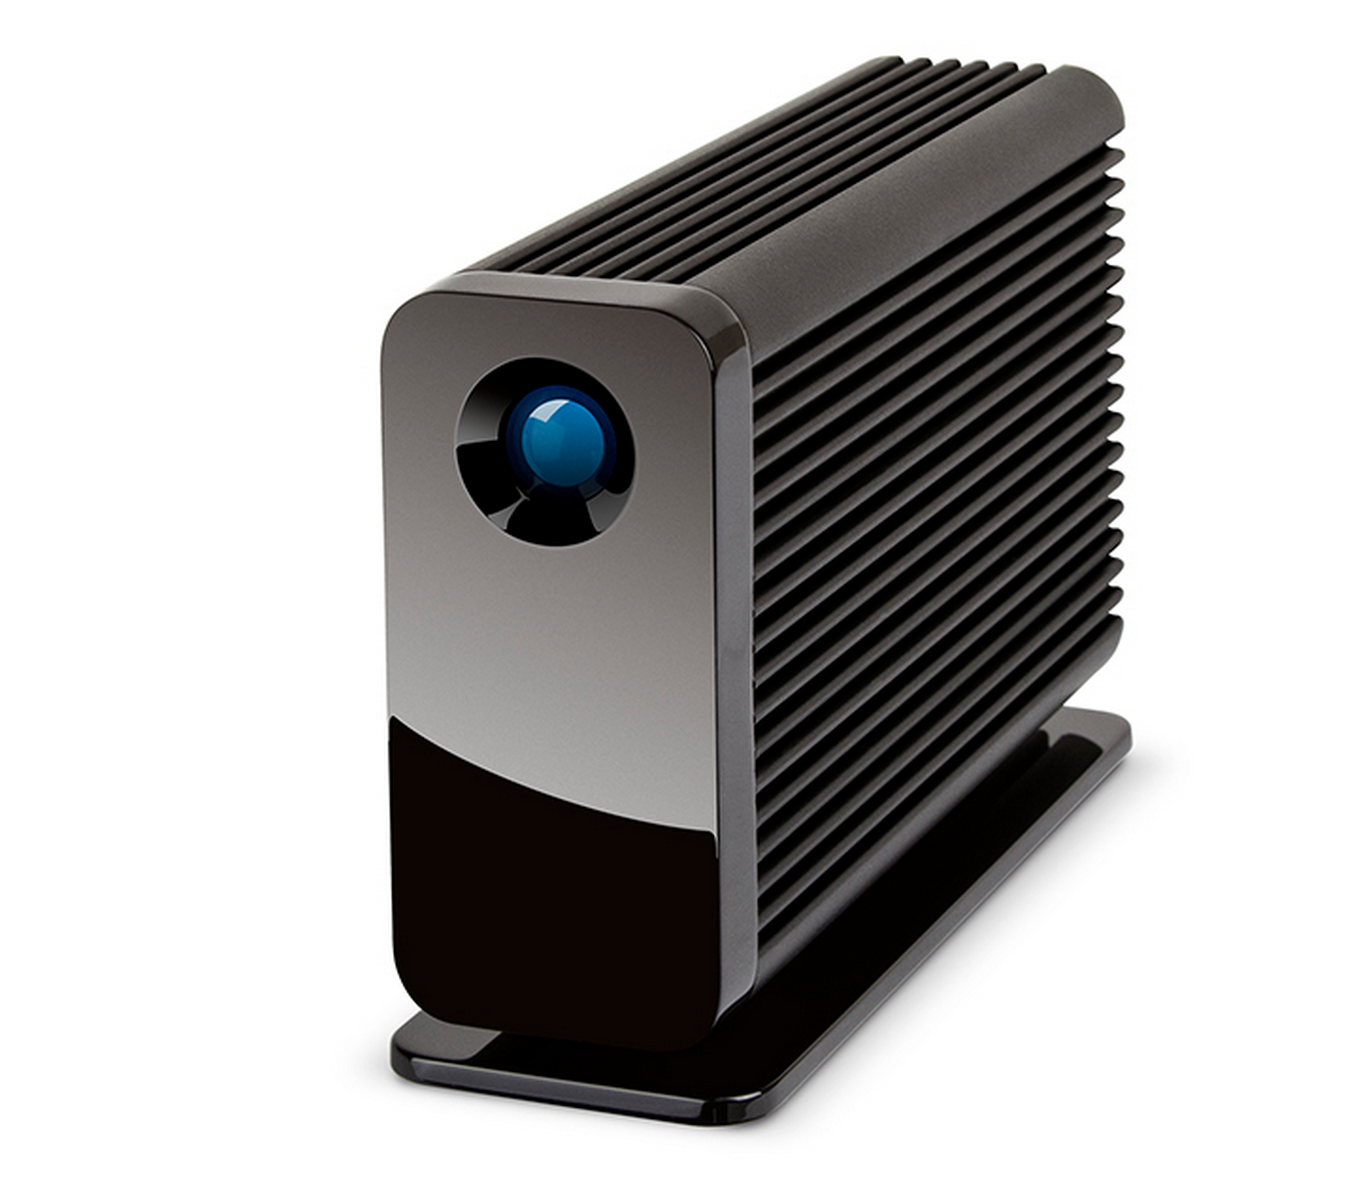 lacie bumps up the speed with thunderbolt 2 drive also unveils 1tb drive for ios devices image 1